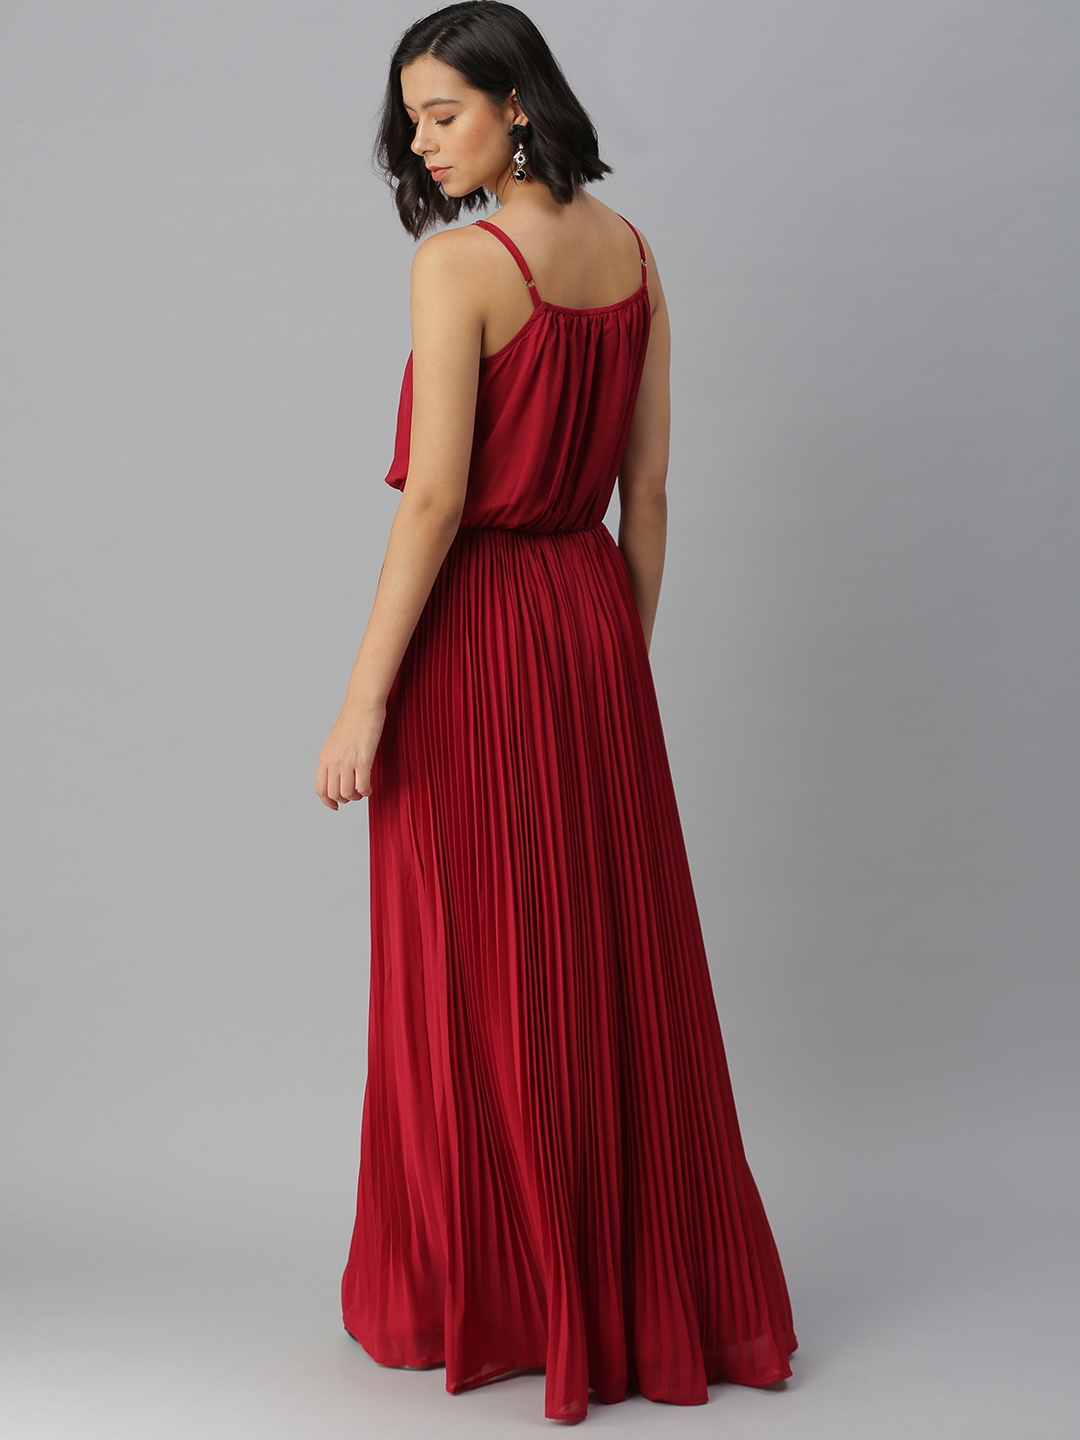 Women's Red Polyester Embellished Dresses